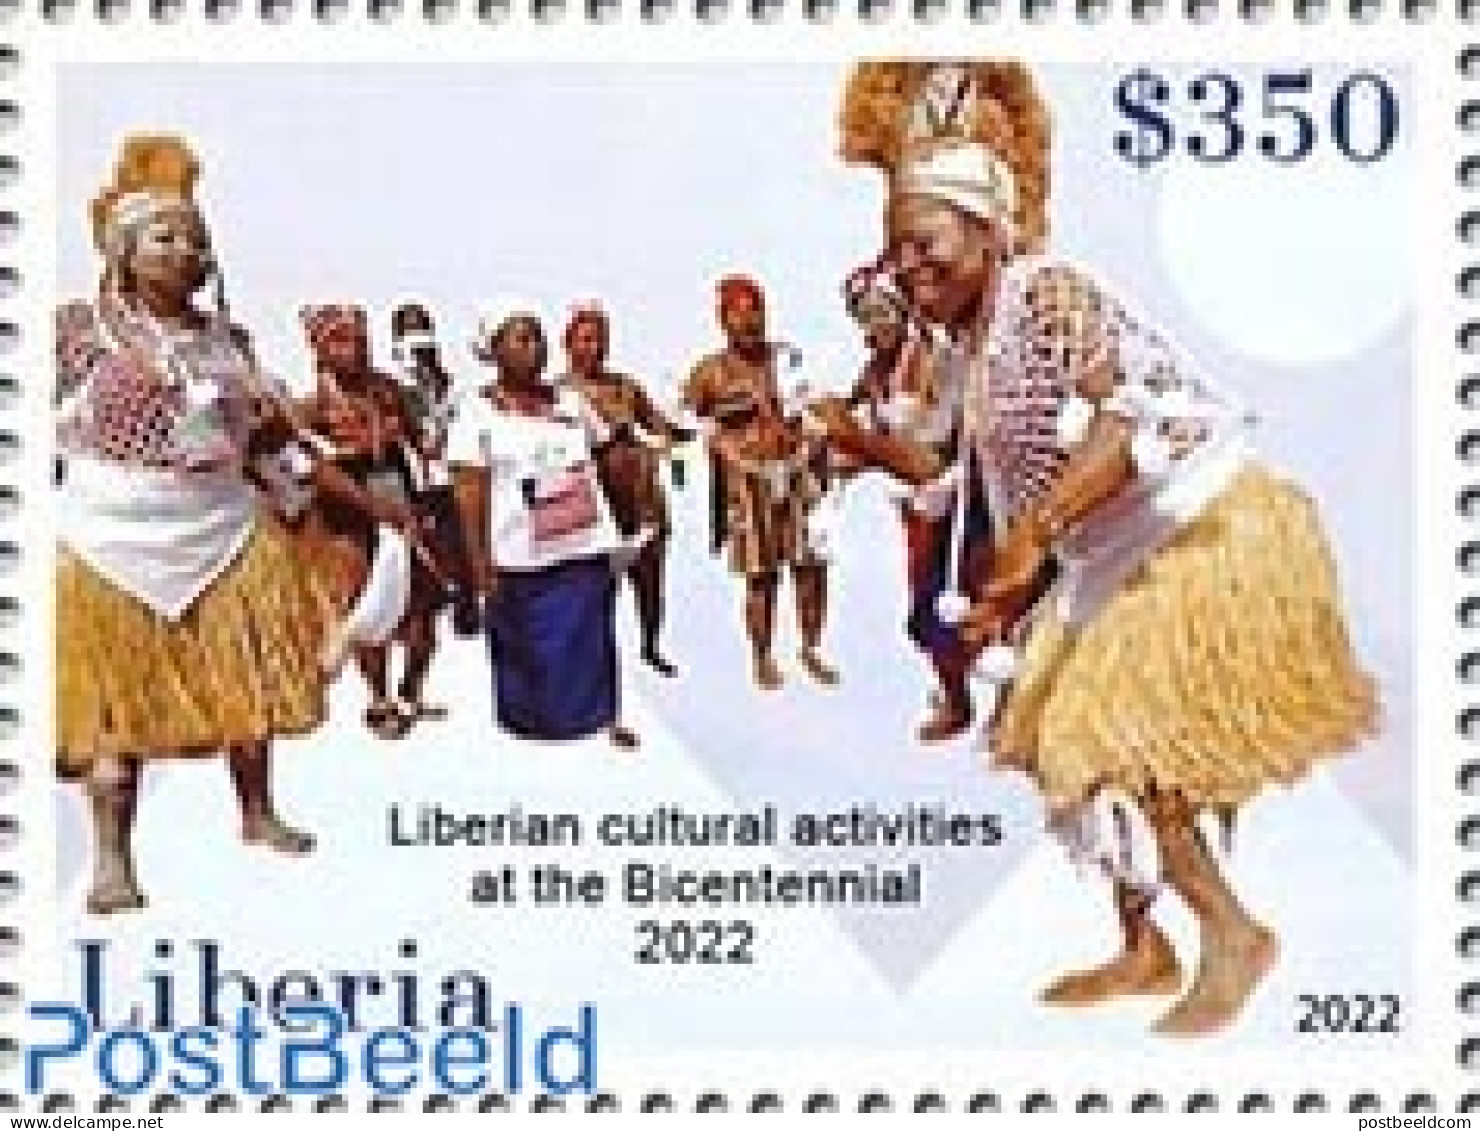 Liberia 2023 Freedom And Pan African Leadership, Mint NH, History - Performance Art - Native People - Dance & Ballet - Tanz